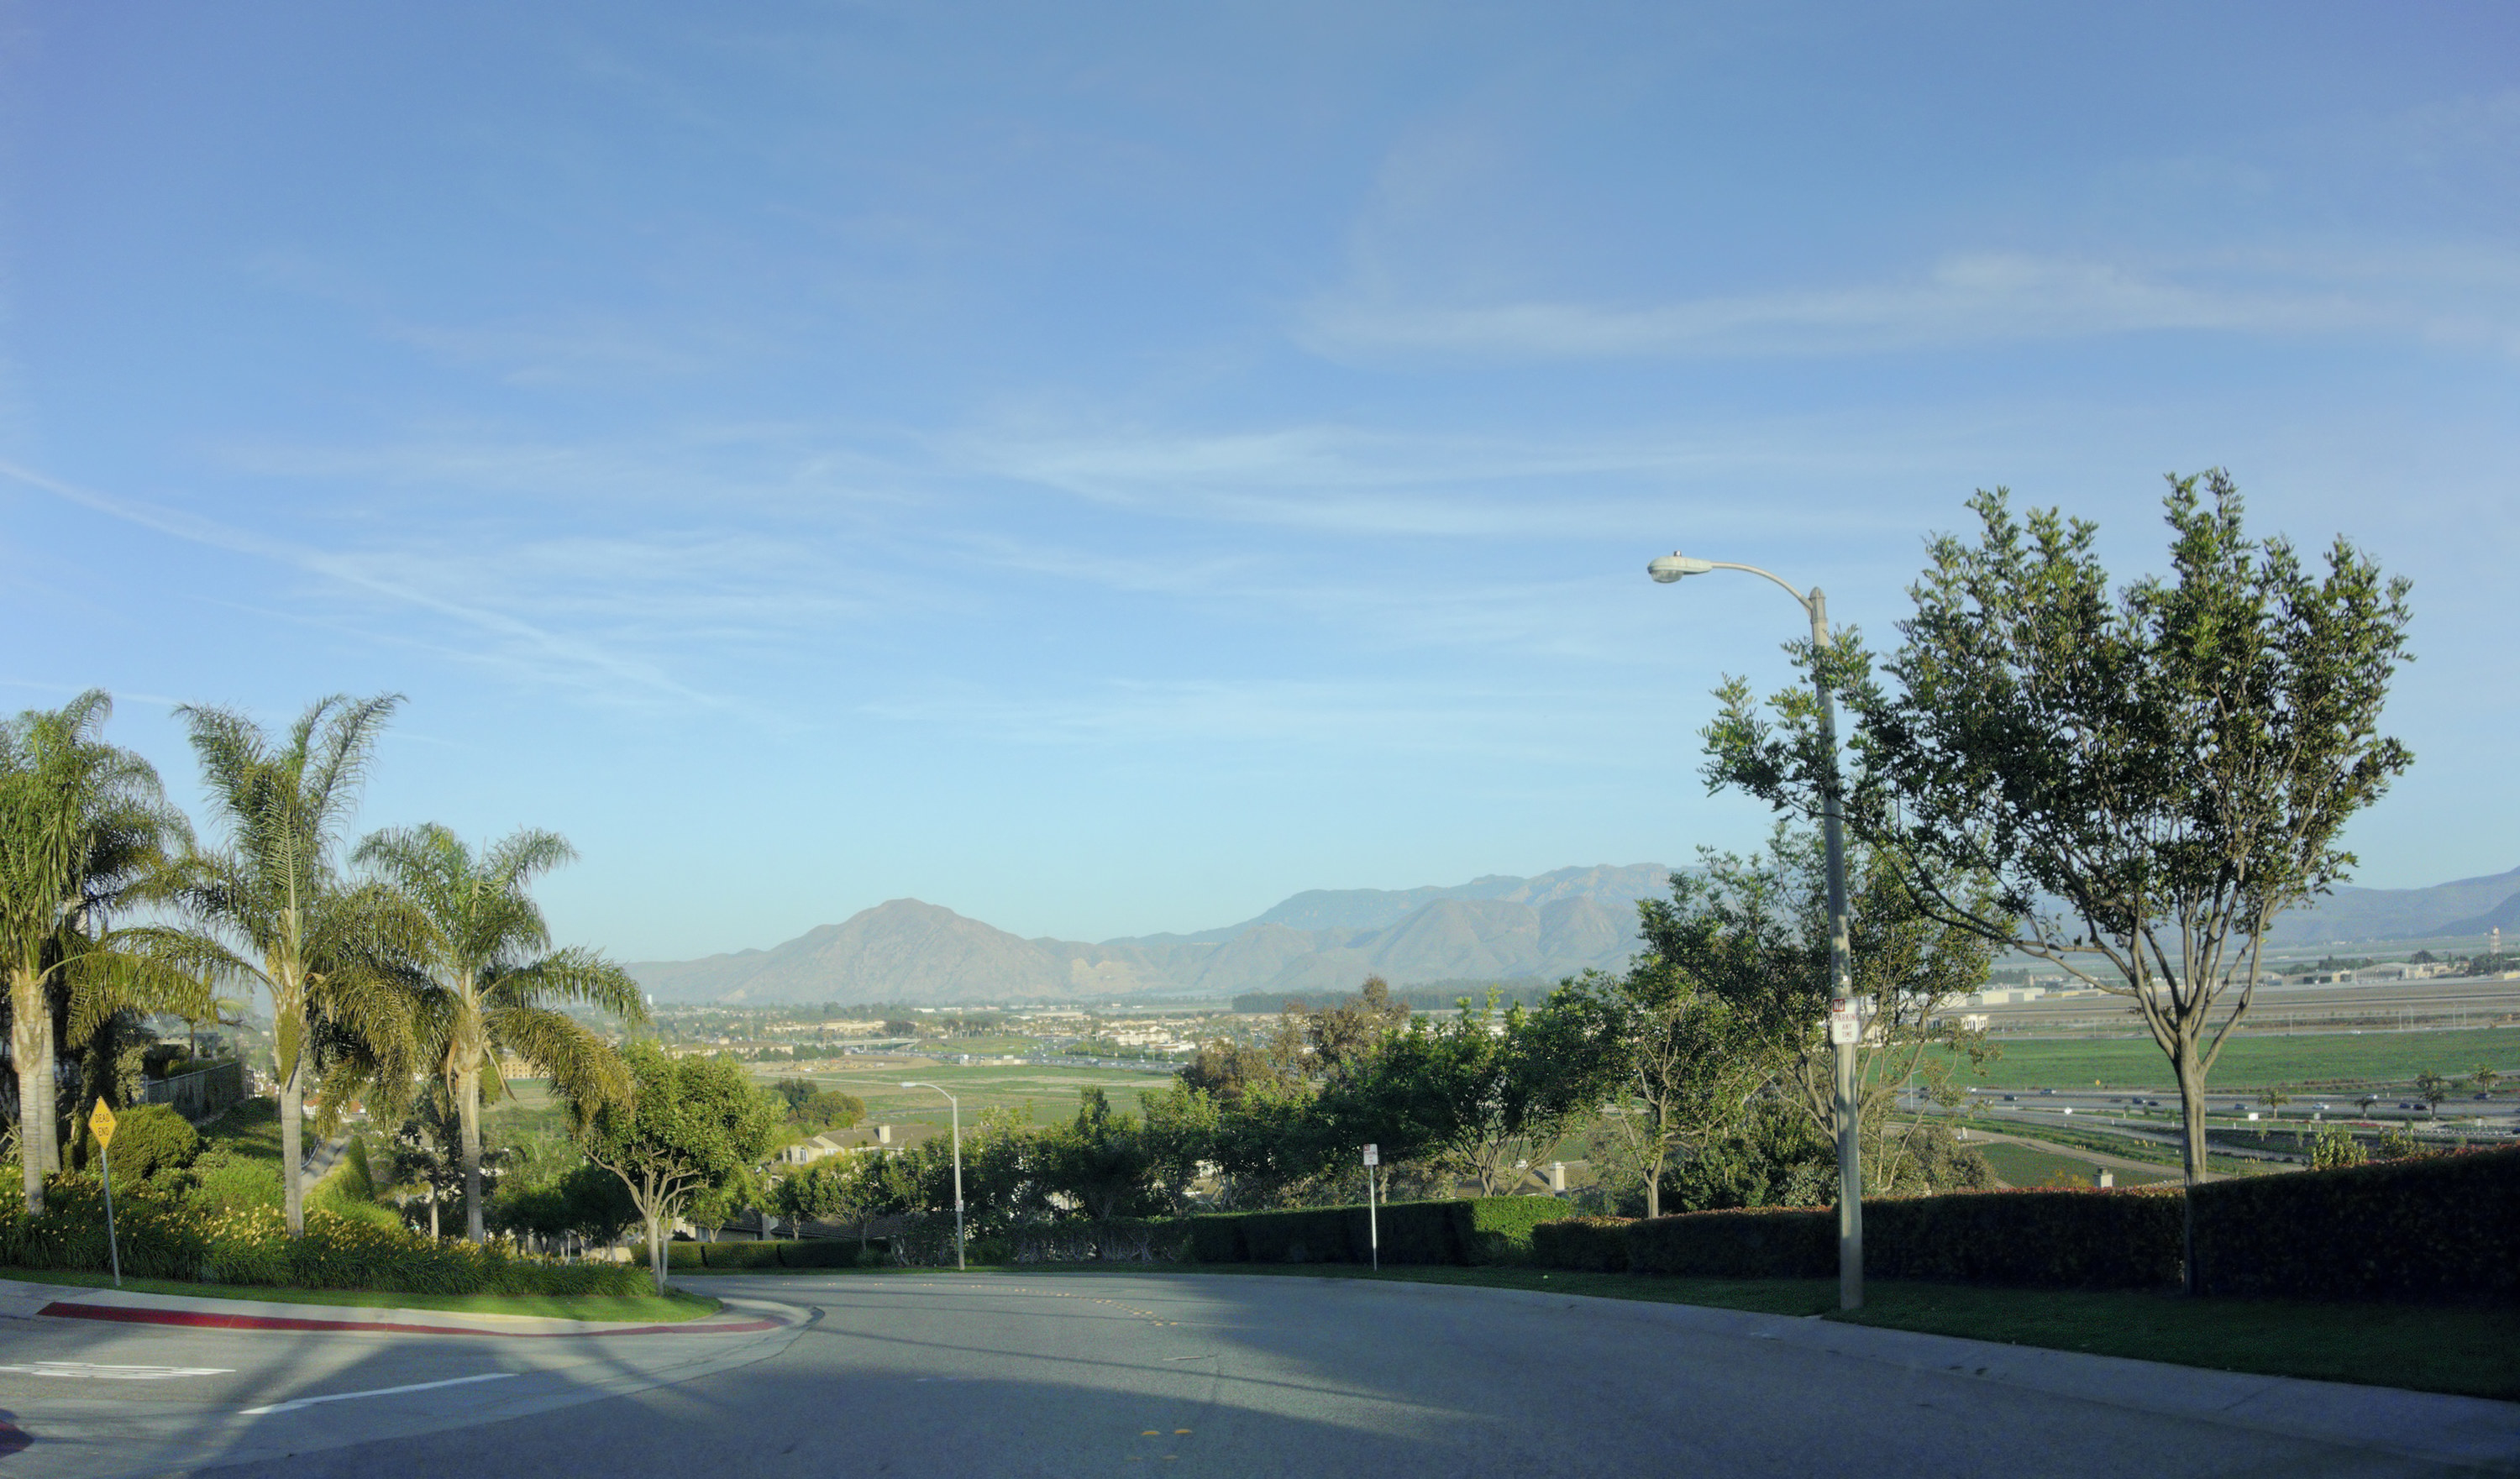 Street lined with palm trees in Camarillo